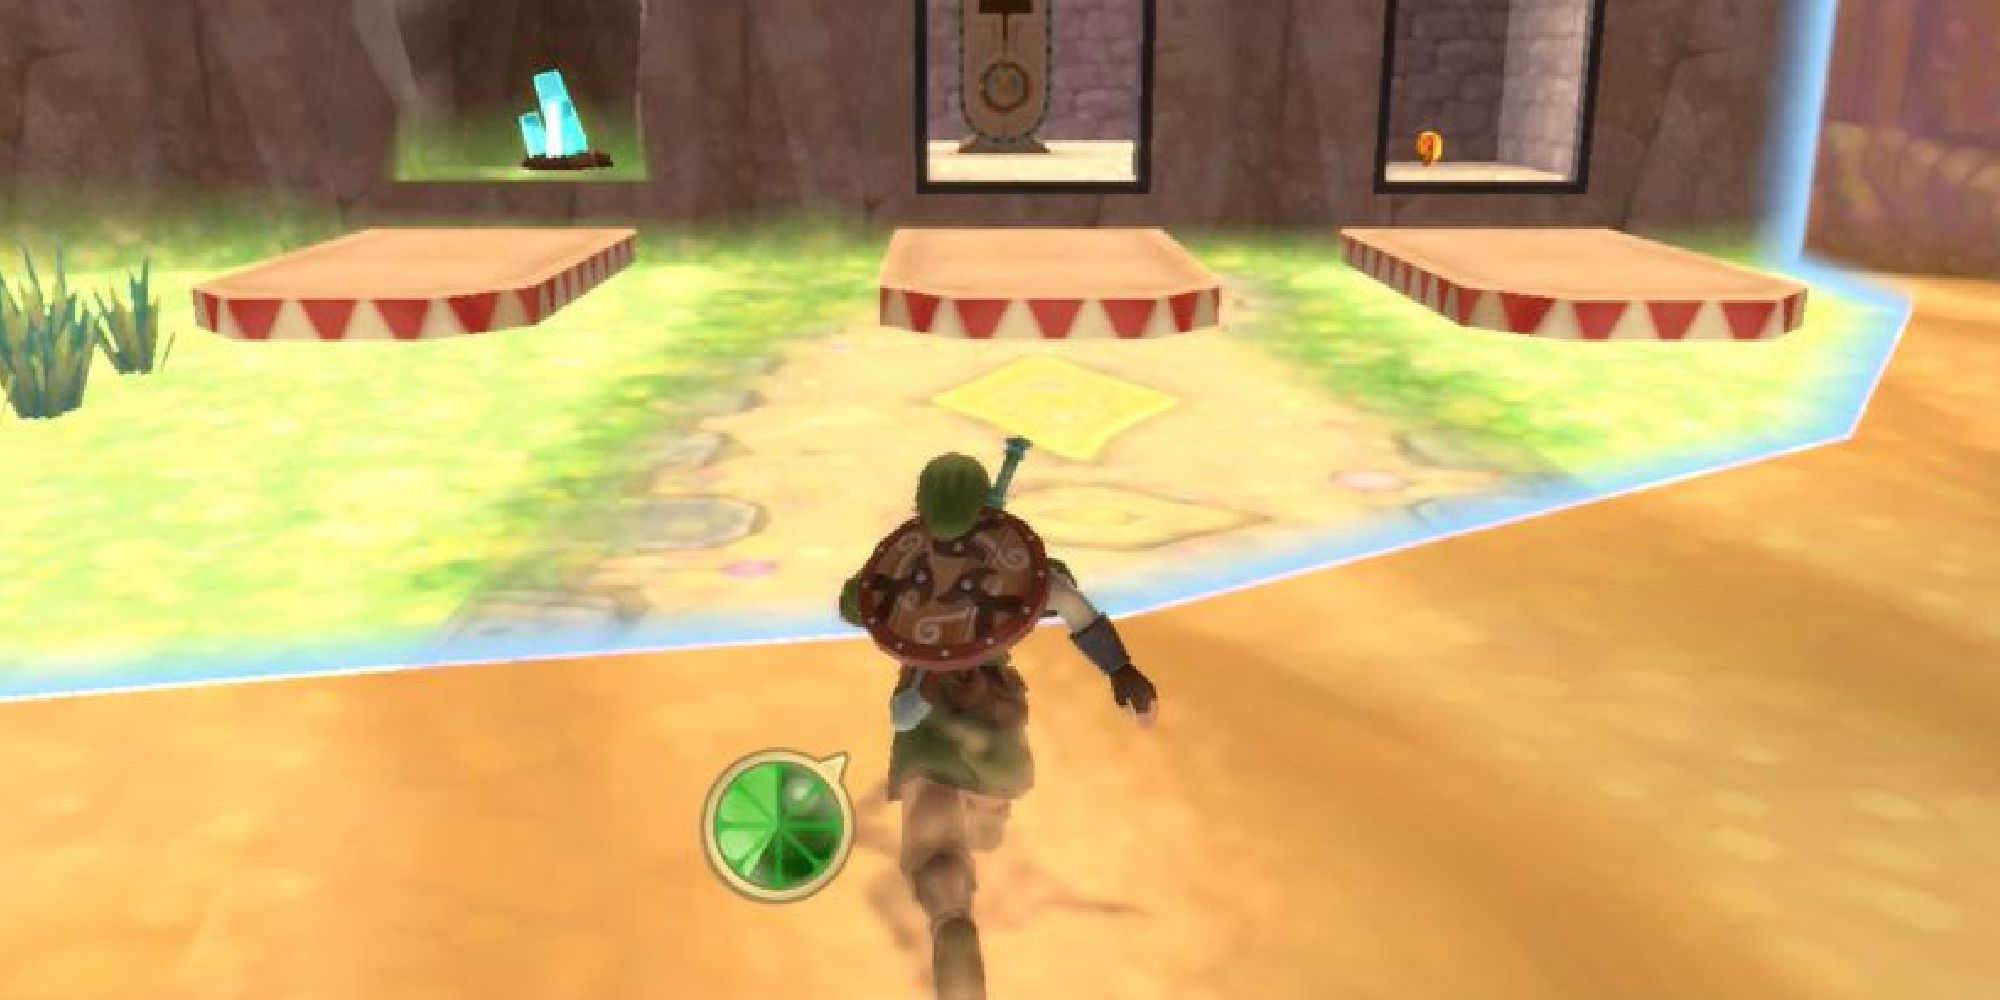 Link running through an area changed by time in Skyward Sword